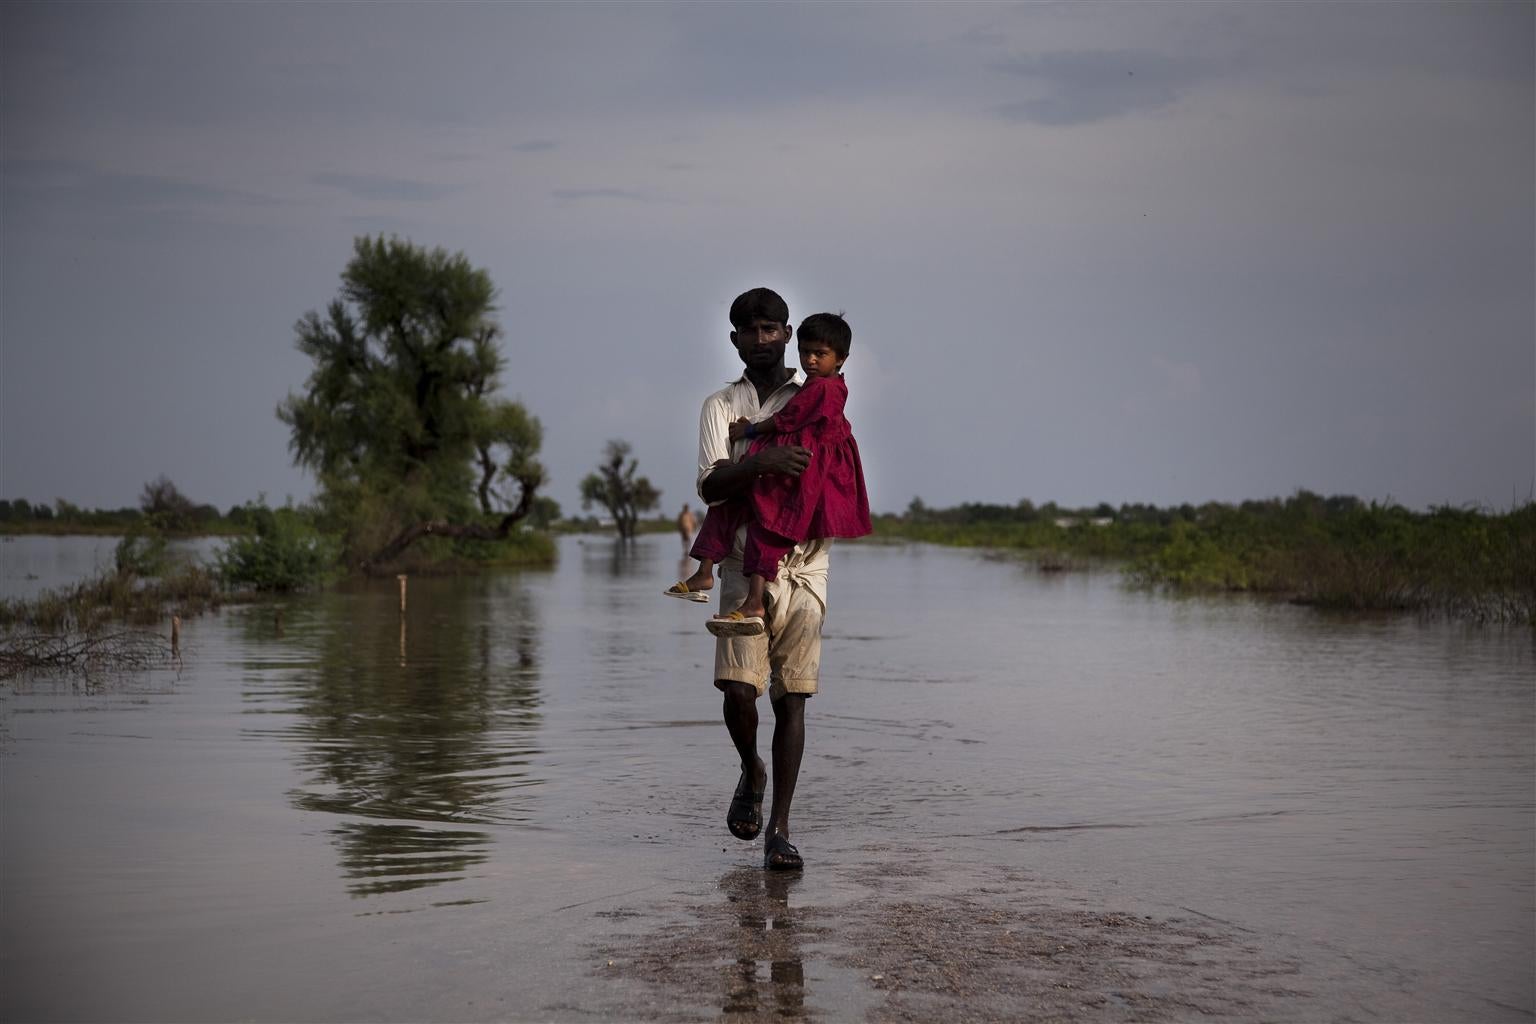 A man carries a child through the flood waters, on 11 September, 2011, in Digri, Pakistan.